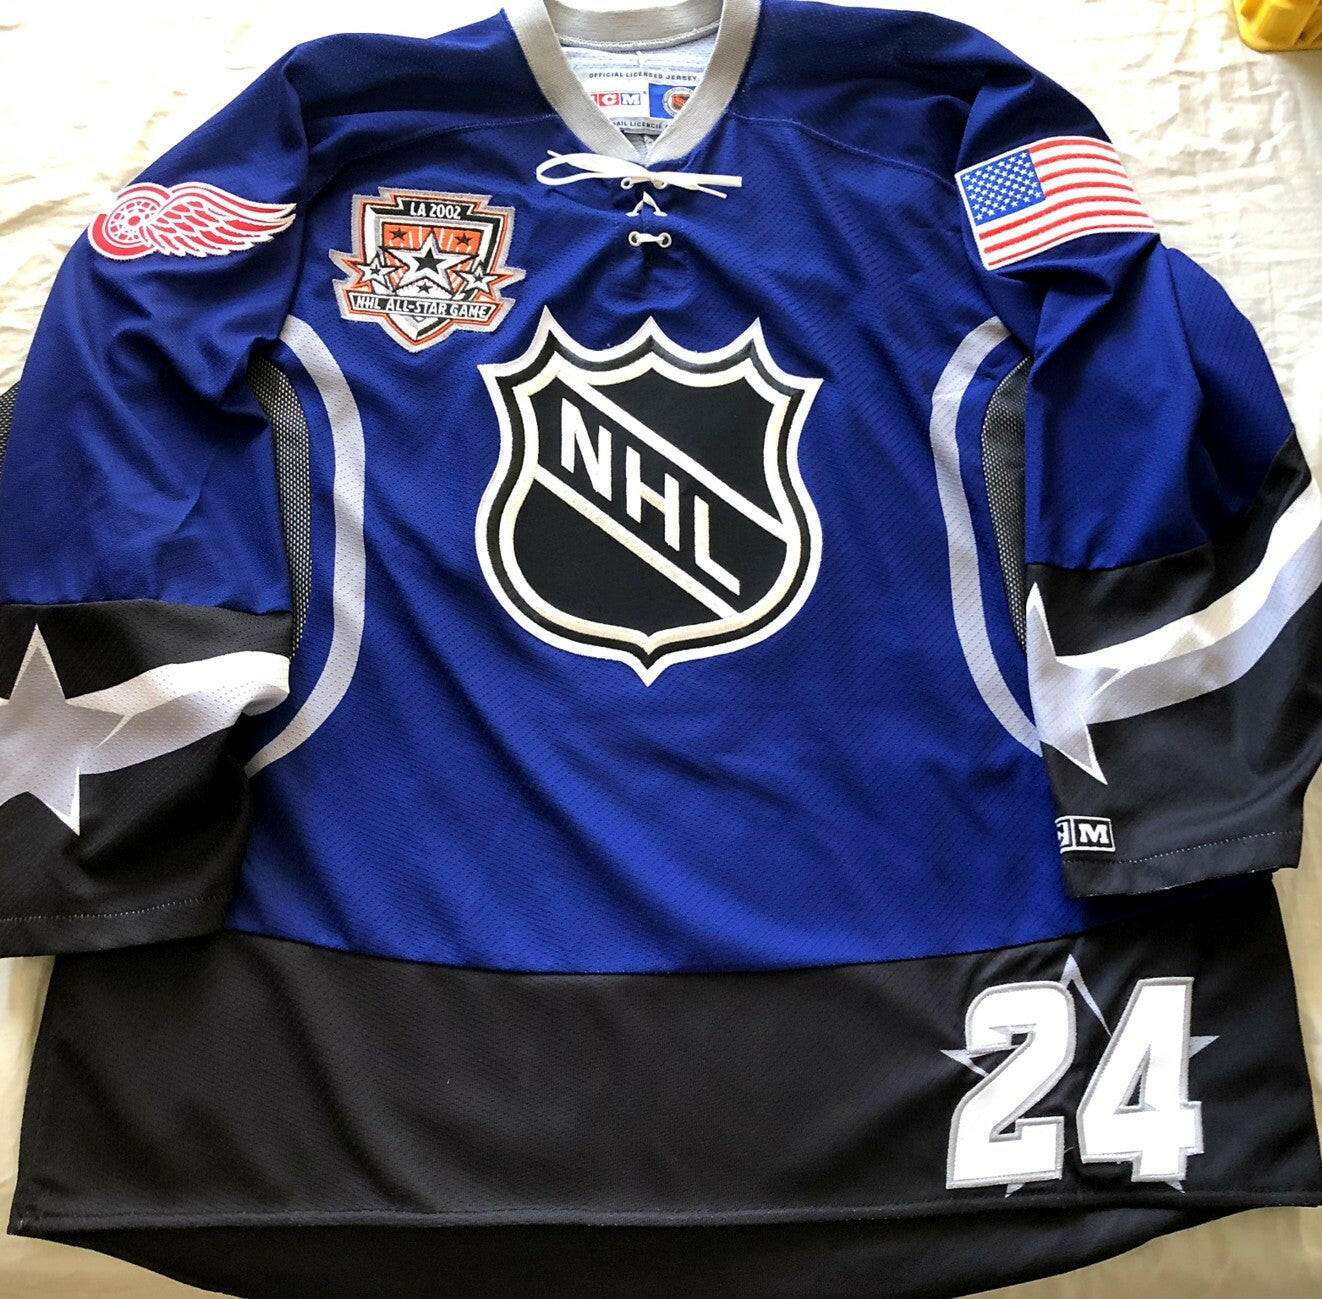 Detroit Red Wings All-Star jersey